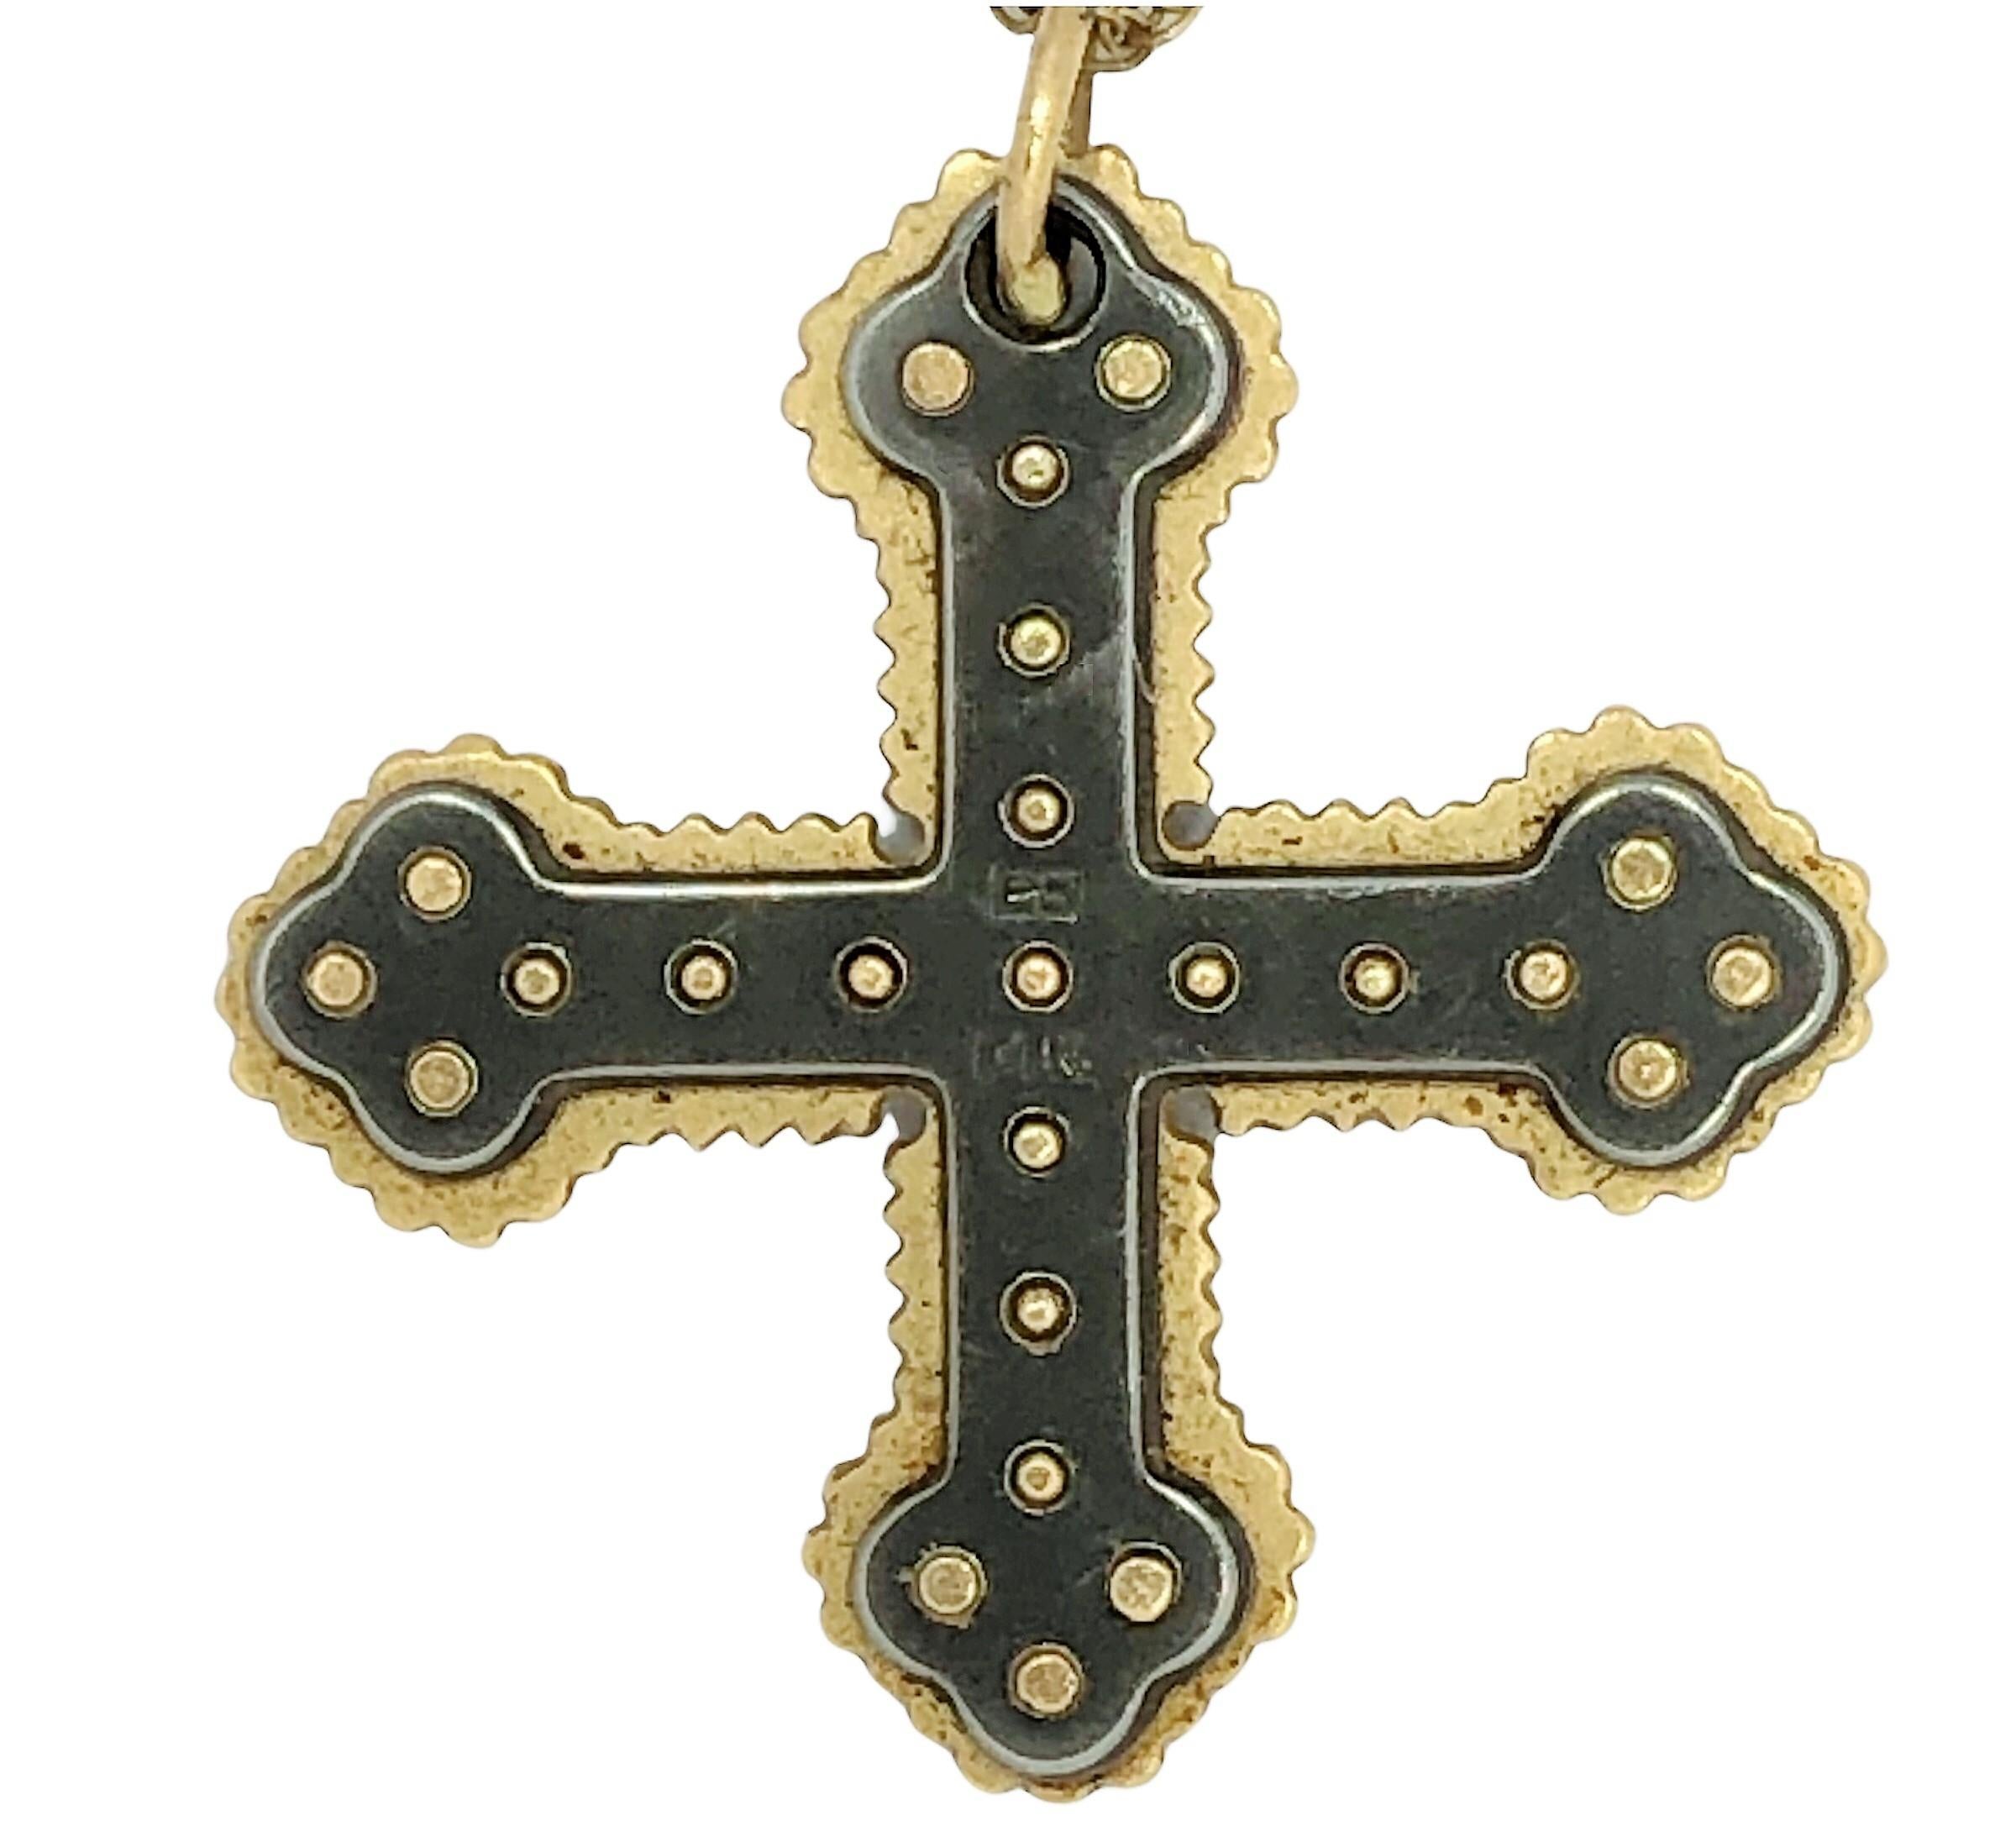 This interesting 14K  Maltese cross has a very Medieval feel and has a strong presence. The gold edges are scalloped and the oxidized surfaces are punctuated with gold beads.  Measures 1 inch in length by 1 inch in width. Marked 14K  